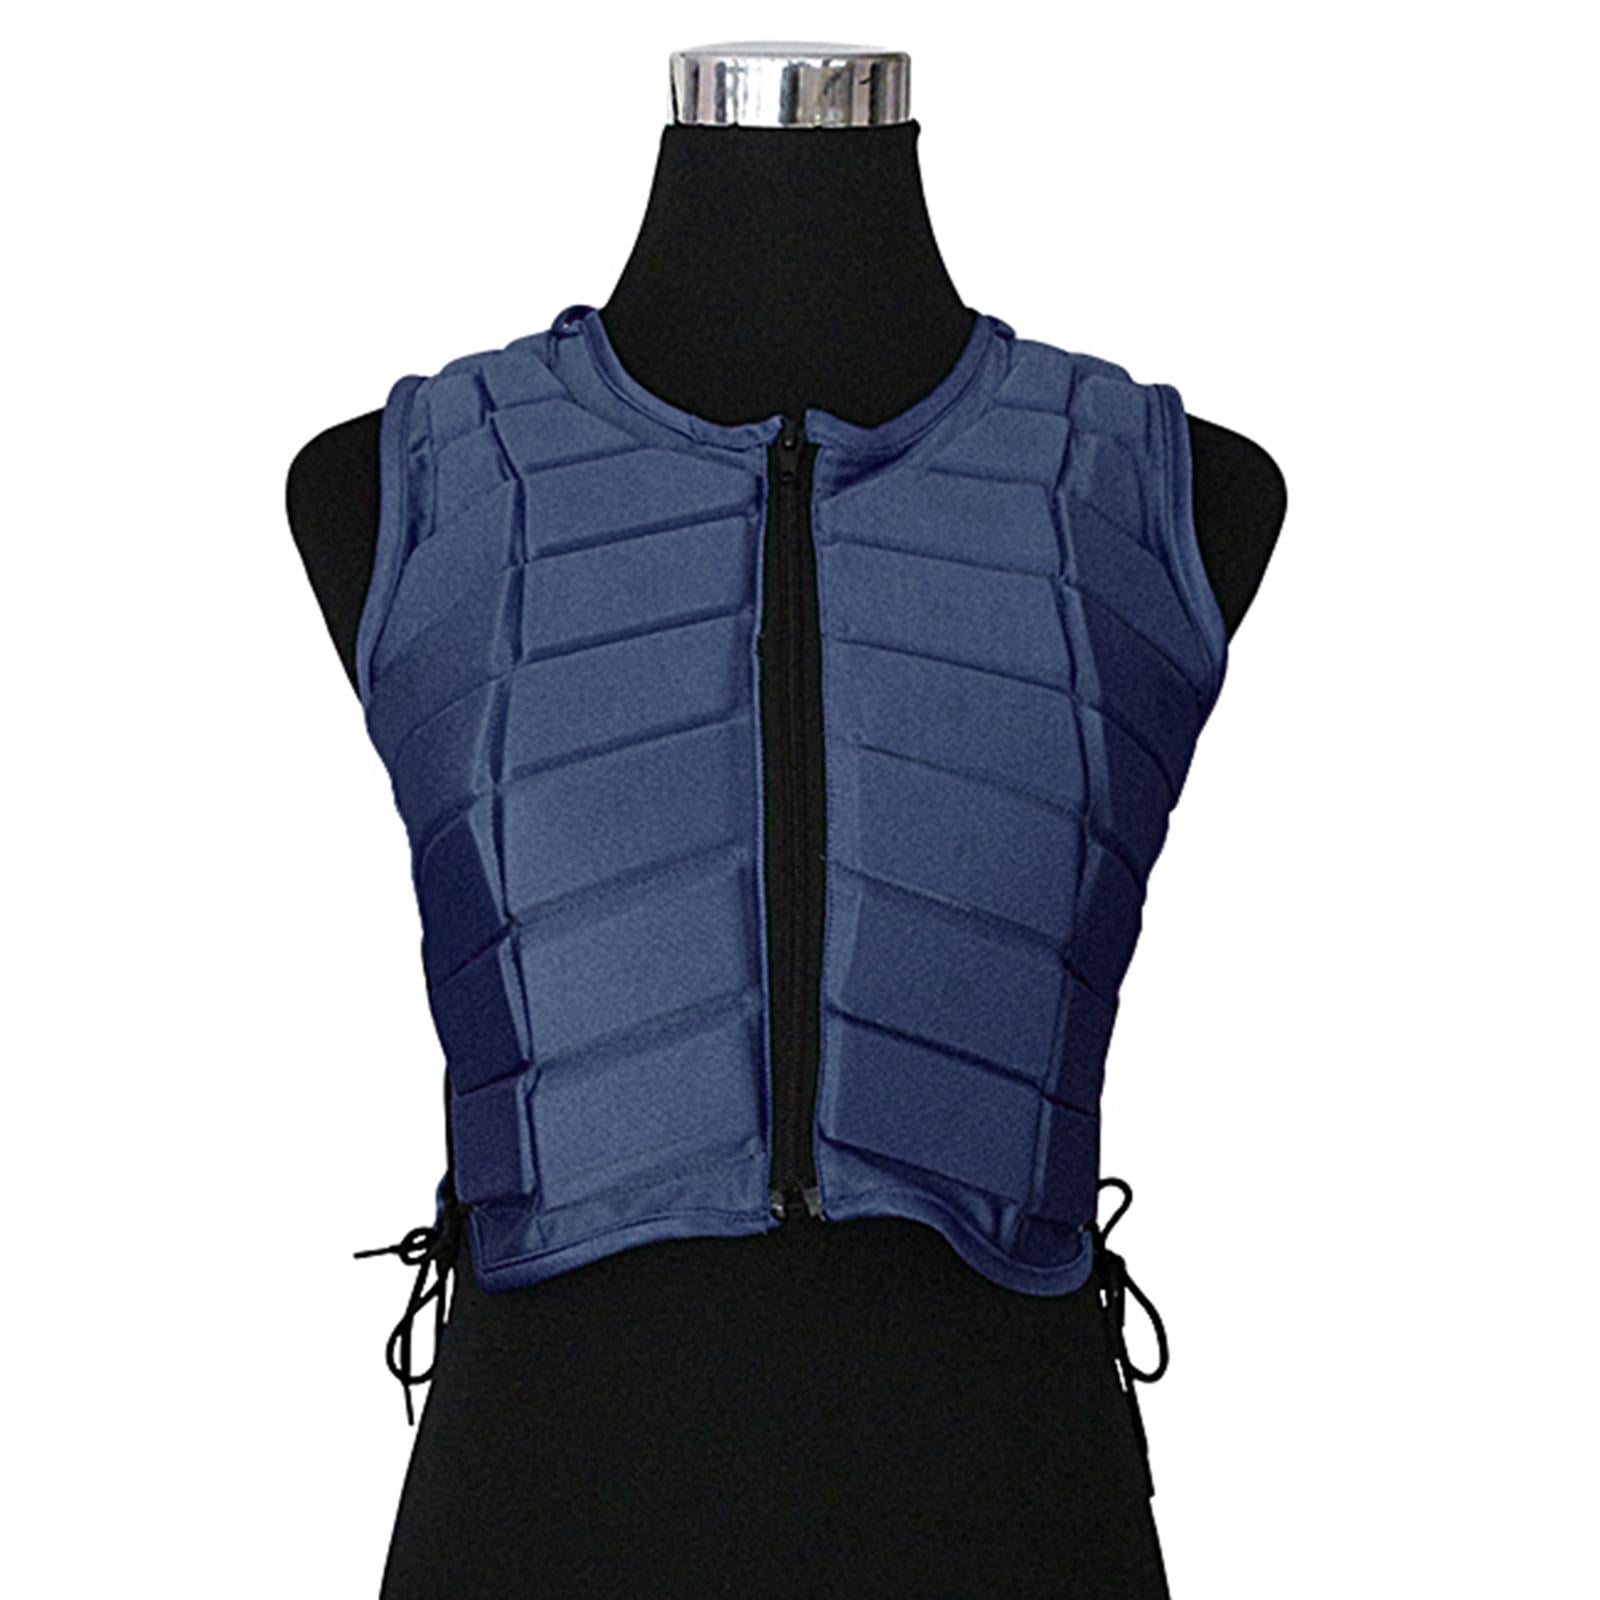 Child/Adult Safety Equestrian Horse Riding Vest Protective Body Protector Gear 